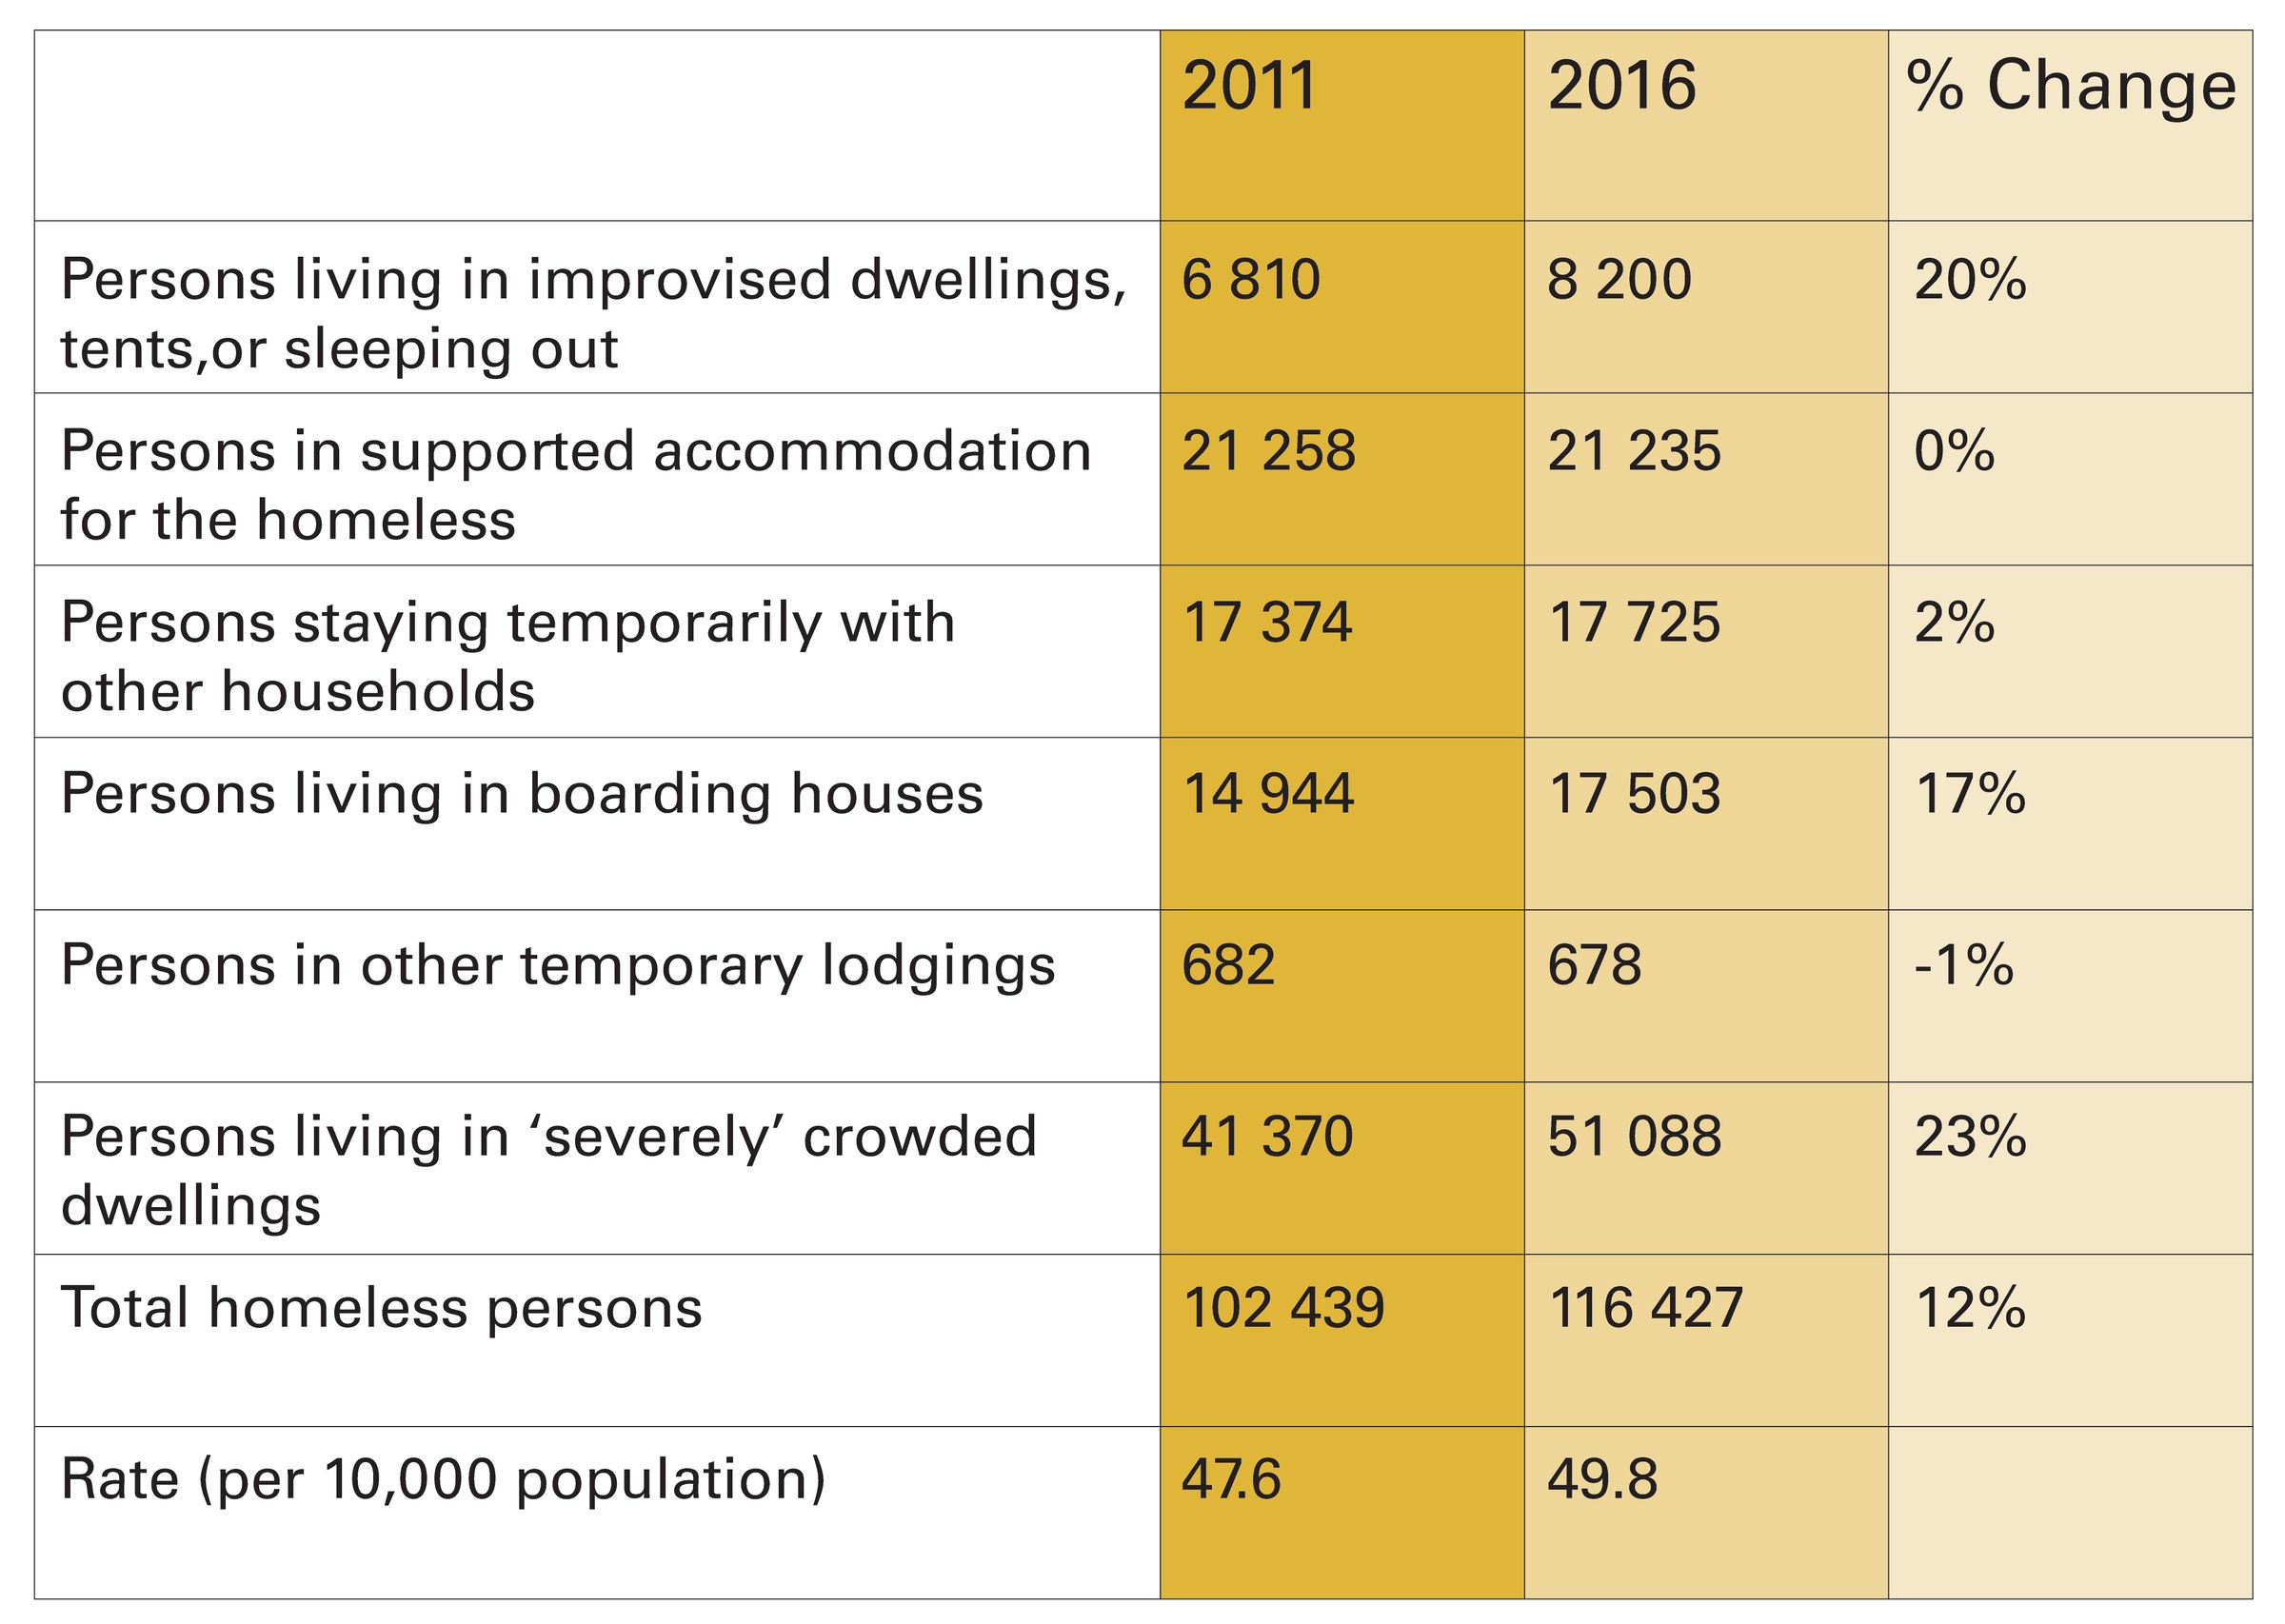 Table of homelessness in Australia in 2011 and 2016. The categories for homelessness include Persons living in improvised dwellings, tents, or sleeping out, where there was a 20% increase between 2011 and 2016. For Persons in supported accommodation for the homeless there was no change. For Persons staying temporarily with other households there was a 2% increase. For Persons living in boarding houses there was a 17% increase. For persons in other temporary lodgings there was a 1% decrease. For Persons living in 'severely' crowded dwellings there was a 23% increase. For the total homeless persons there was an increase of 14%.